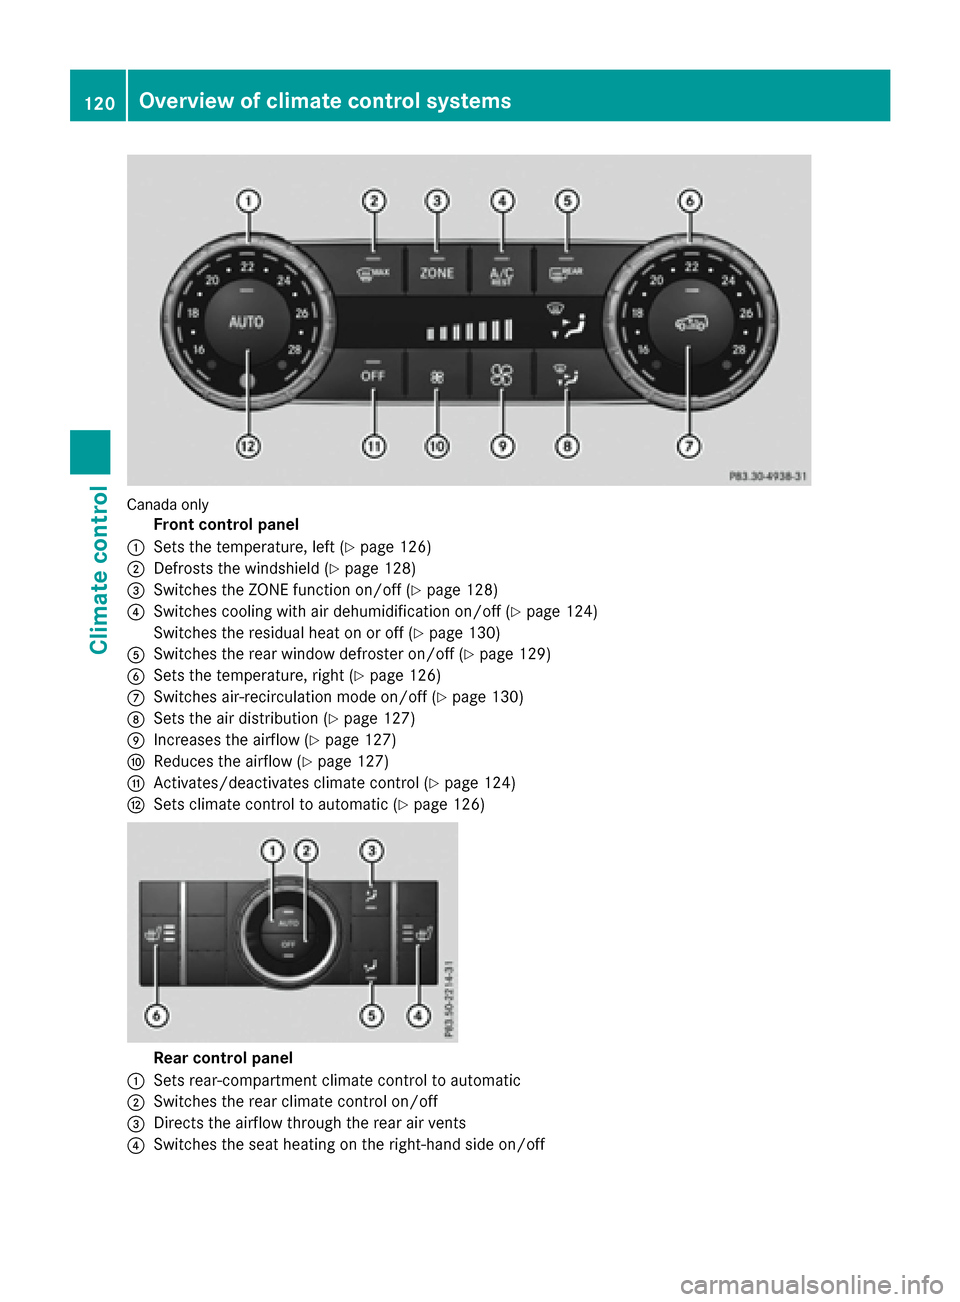 MERCEDES-BENZ GLE-Class 2016 C292 Owners Manual Canada only
Front control panel
:Sets the temperature, left (Ypage 126)
;Defrosts the windshield (Ypage 128)
=Switches the ZONE function on/off (Ypage 128)
?Switches cooling with air dehumidification 